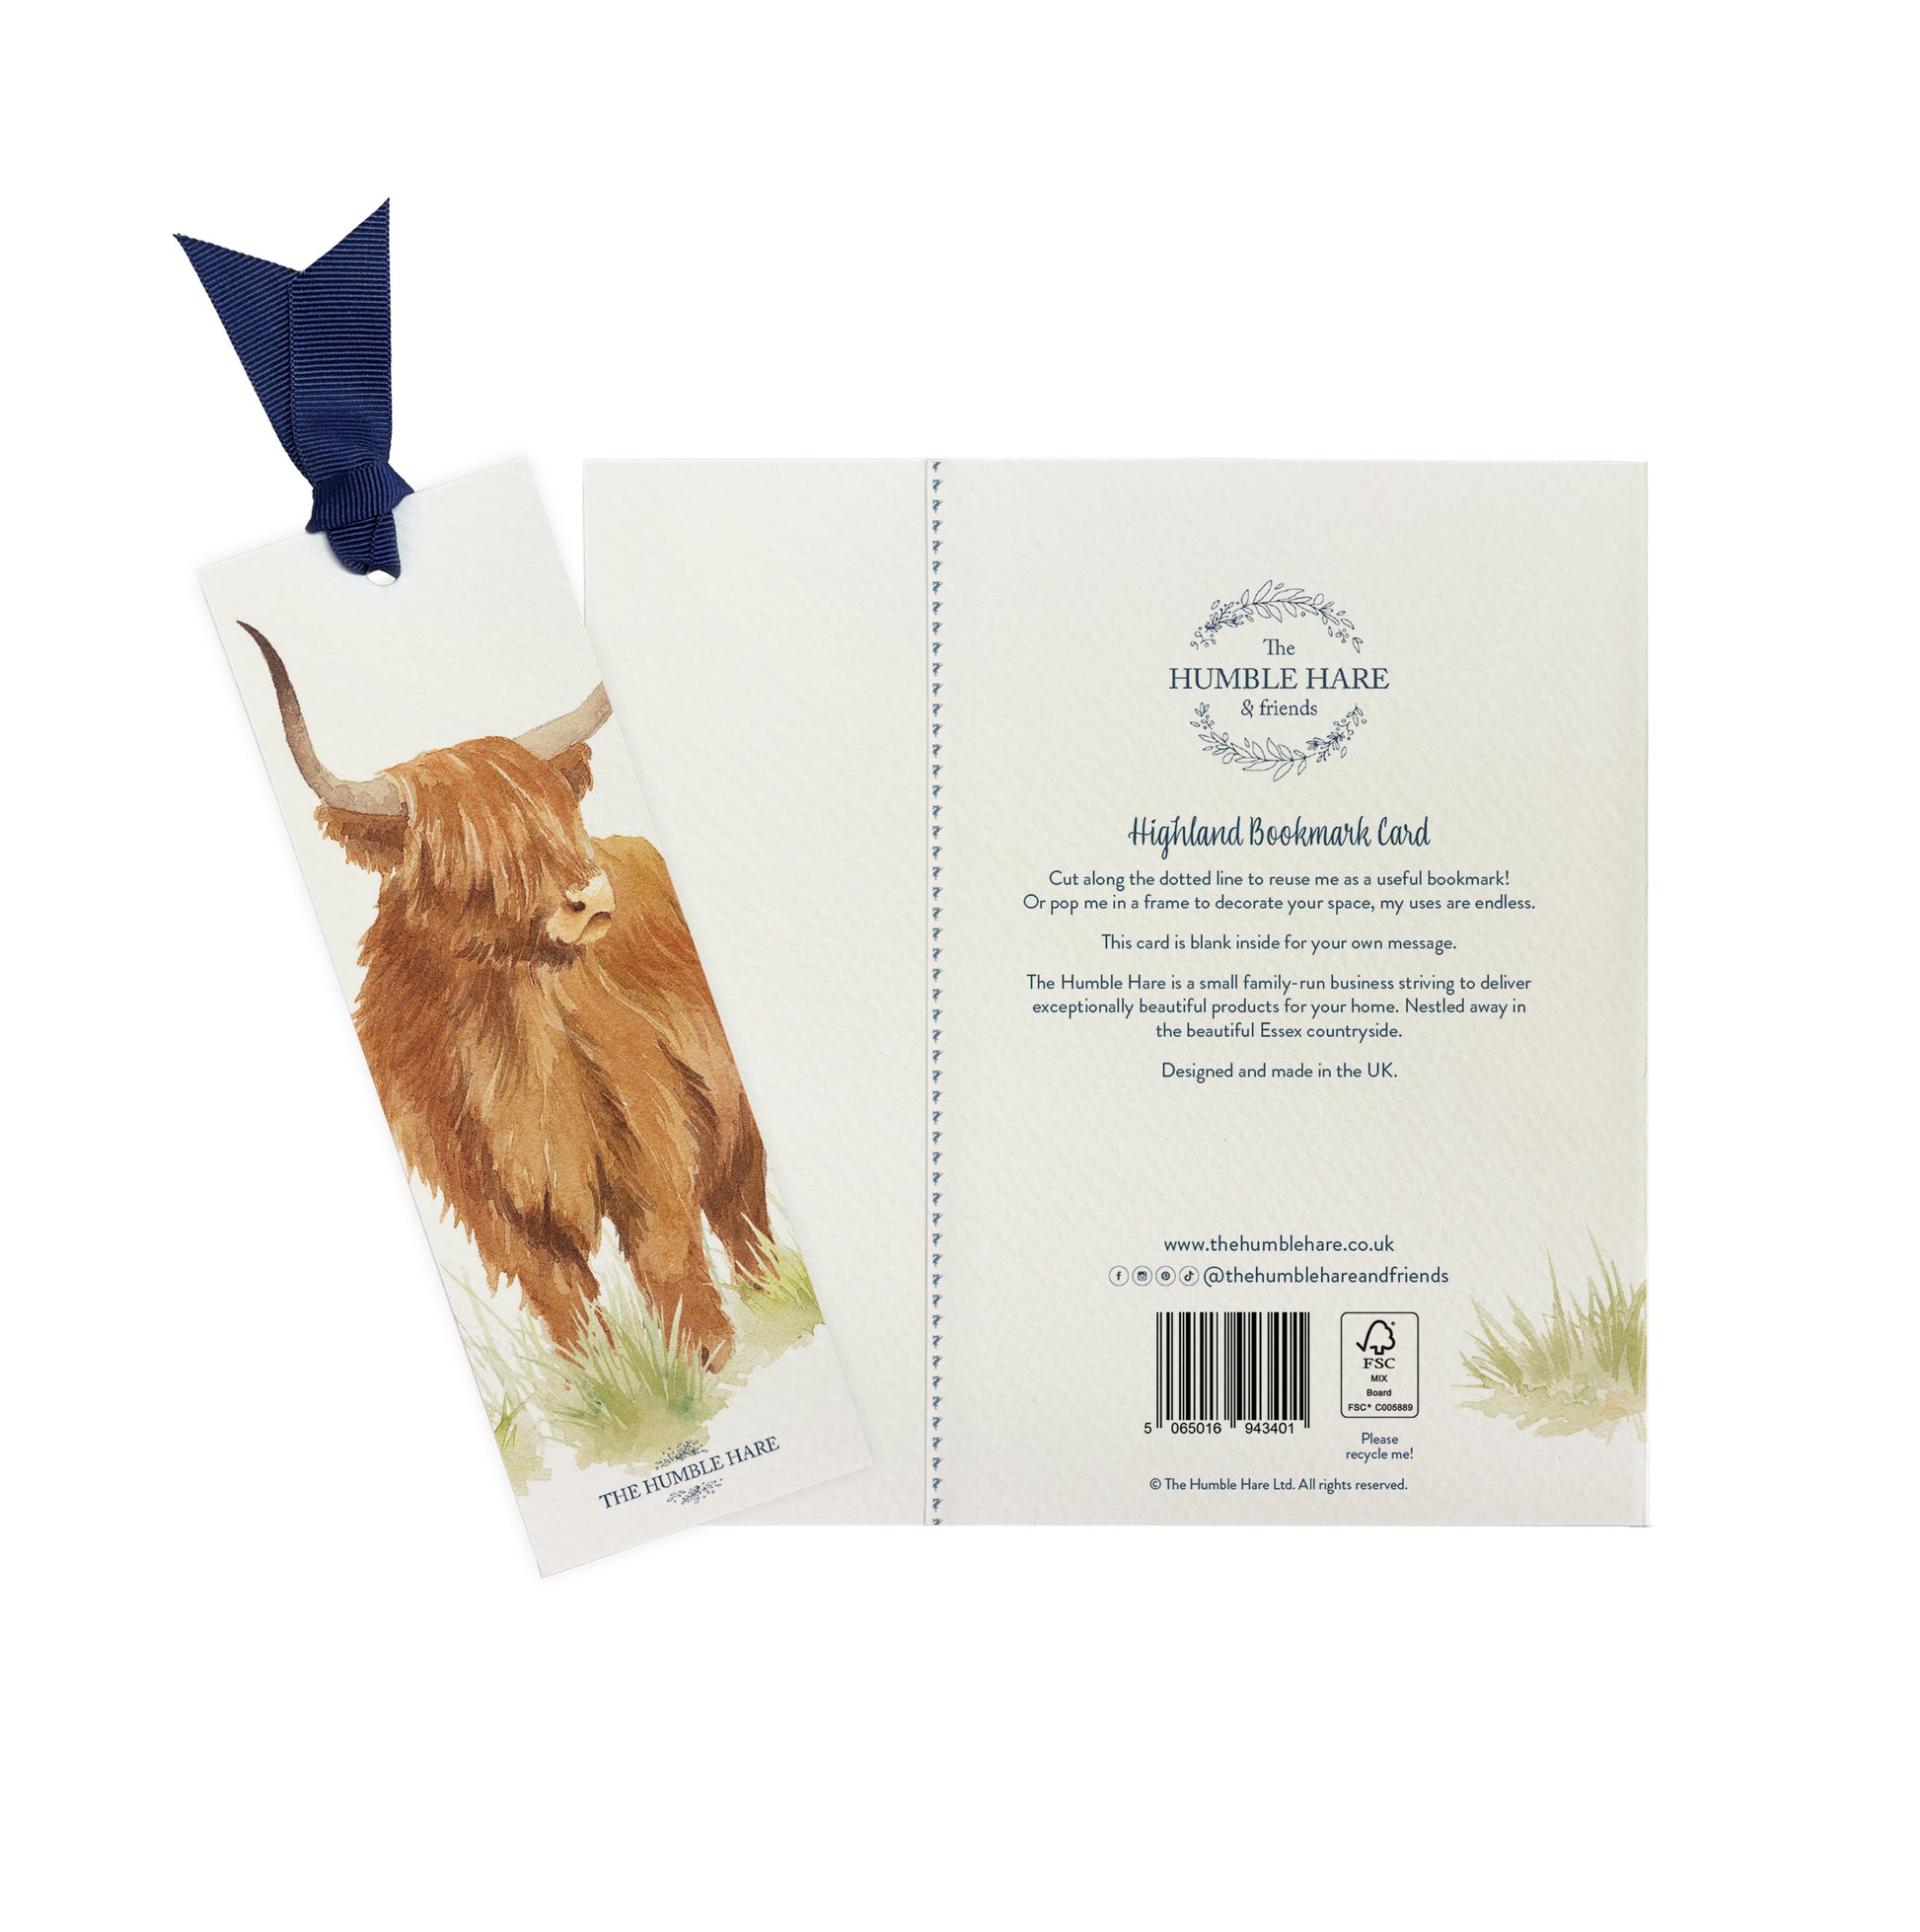 The back of a greetings card showing that it can be reused as a bookmark featuring a highland cow in a watercolour style. 